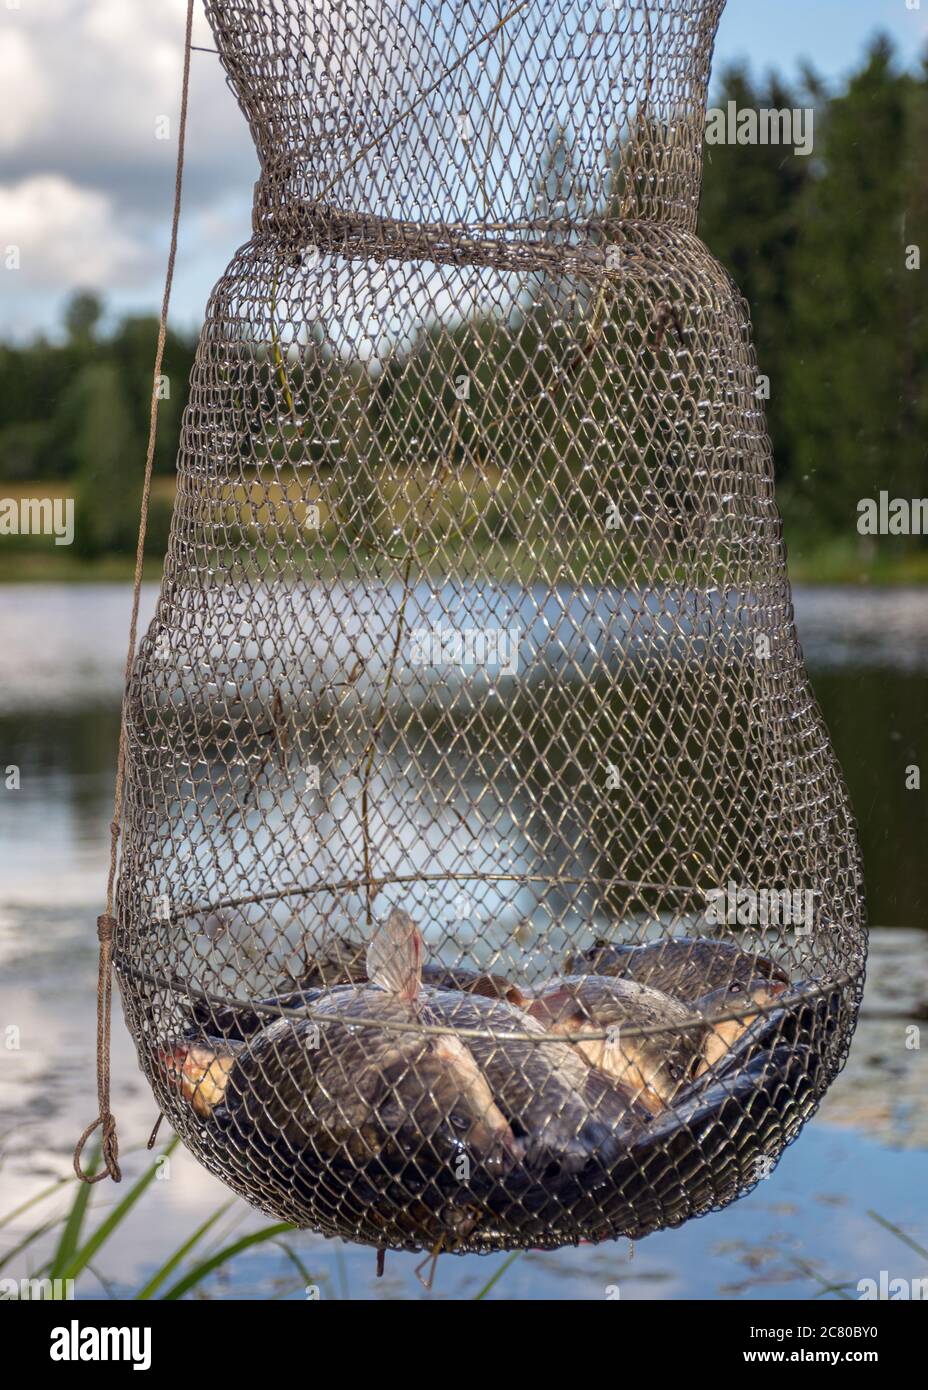 https://c8.alamy.com/comp/2C80BY0/the-role-of-a-fisherman-in-a-fish-storage-net-summer-nature-by-the-lake-fishing-in-summer-2C80BY0.jpg